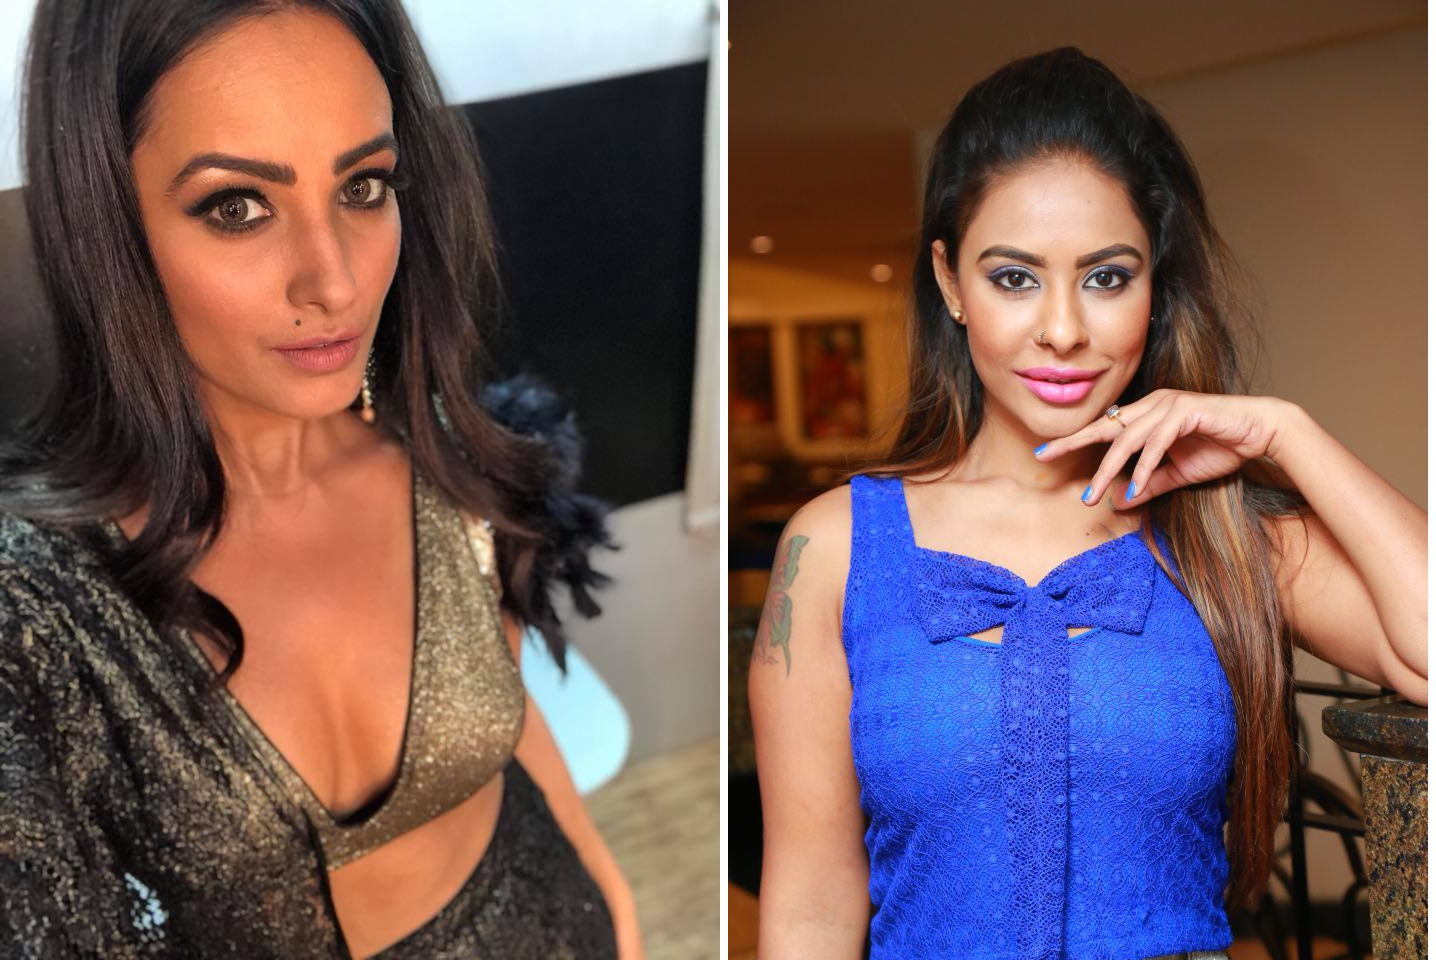 #MeToo: After Sri Reddy, now Nuvvu Nenu actress Anita Hassanandani opens up about Casting Couch